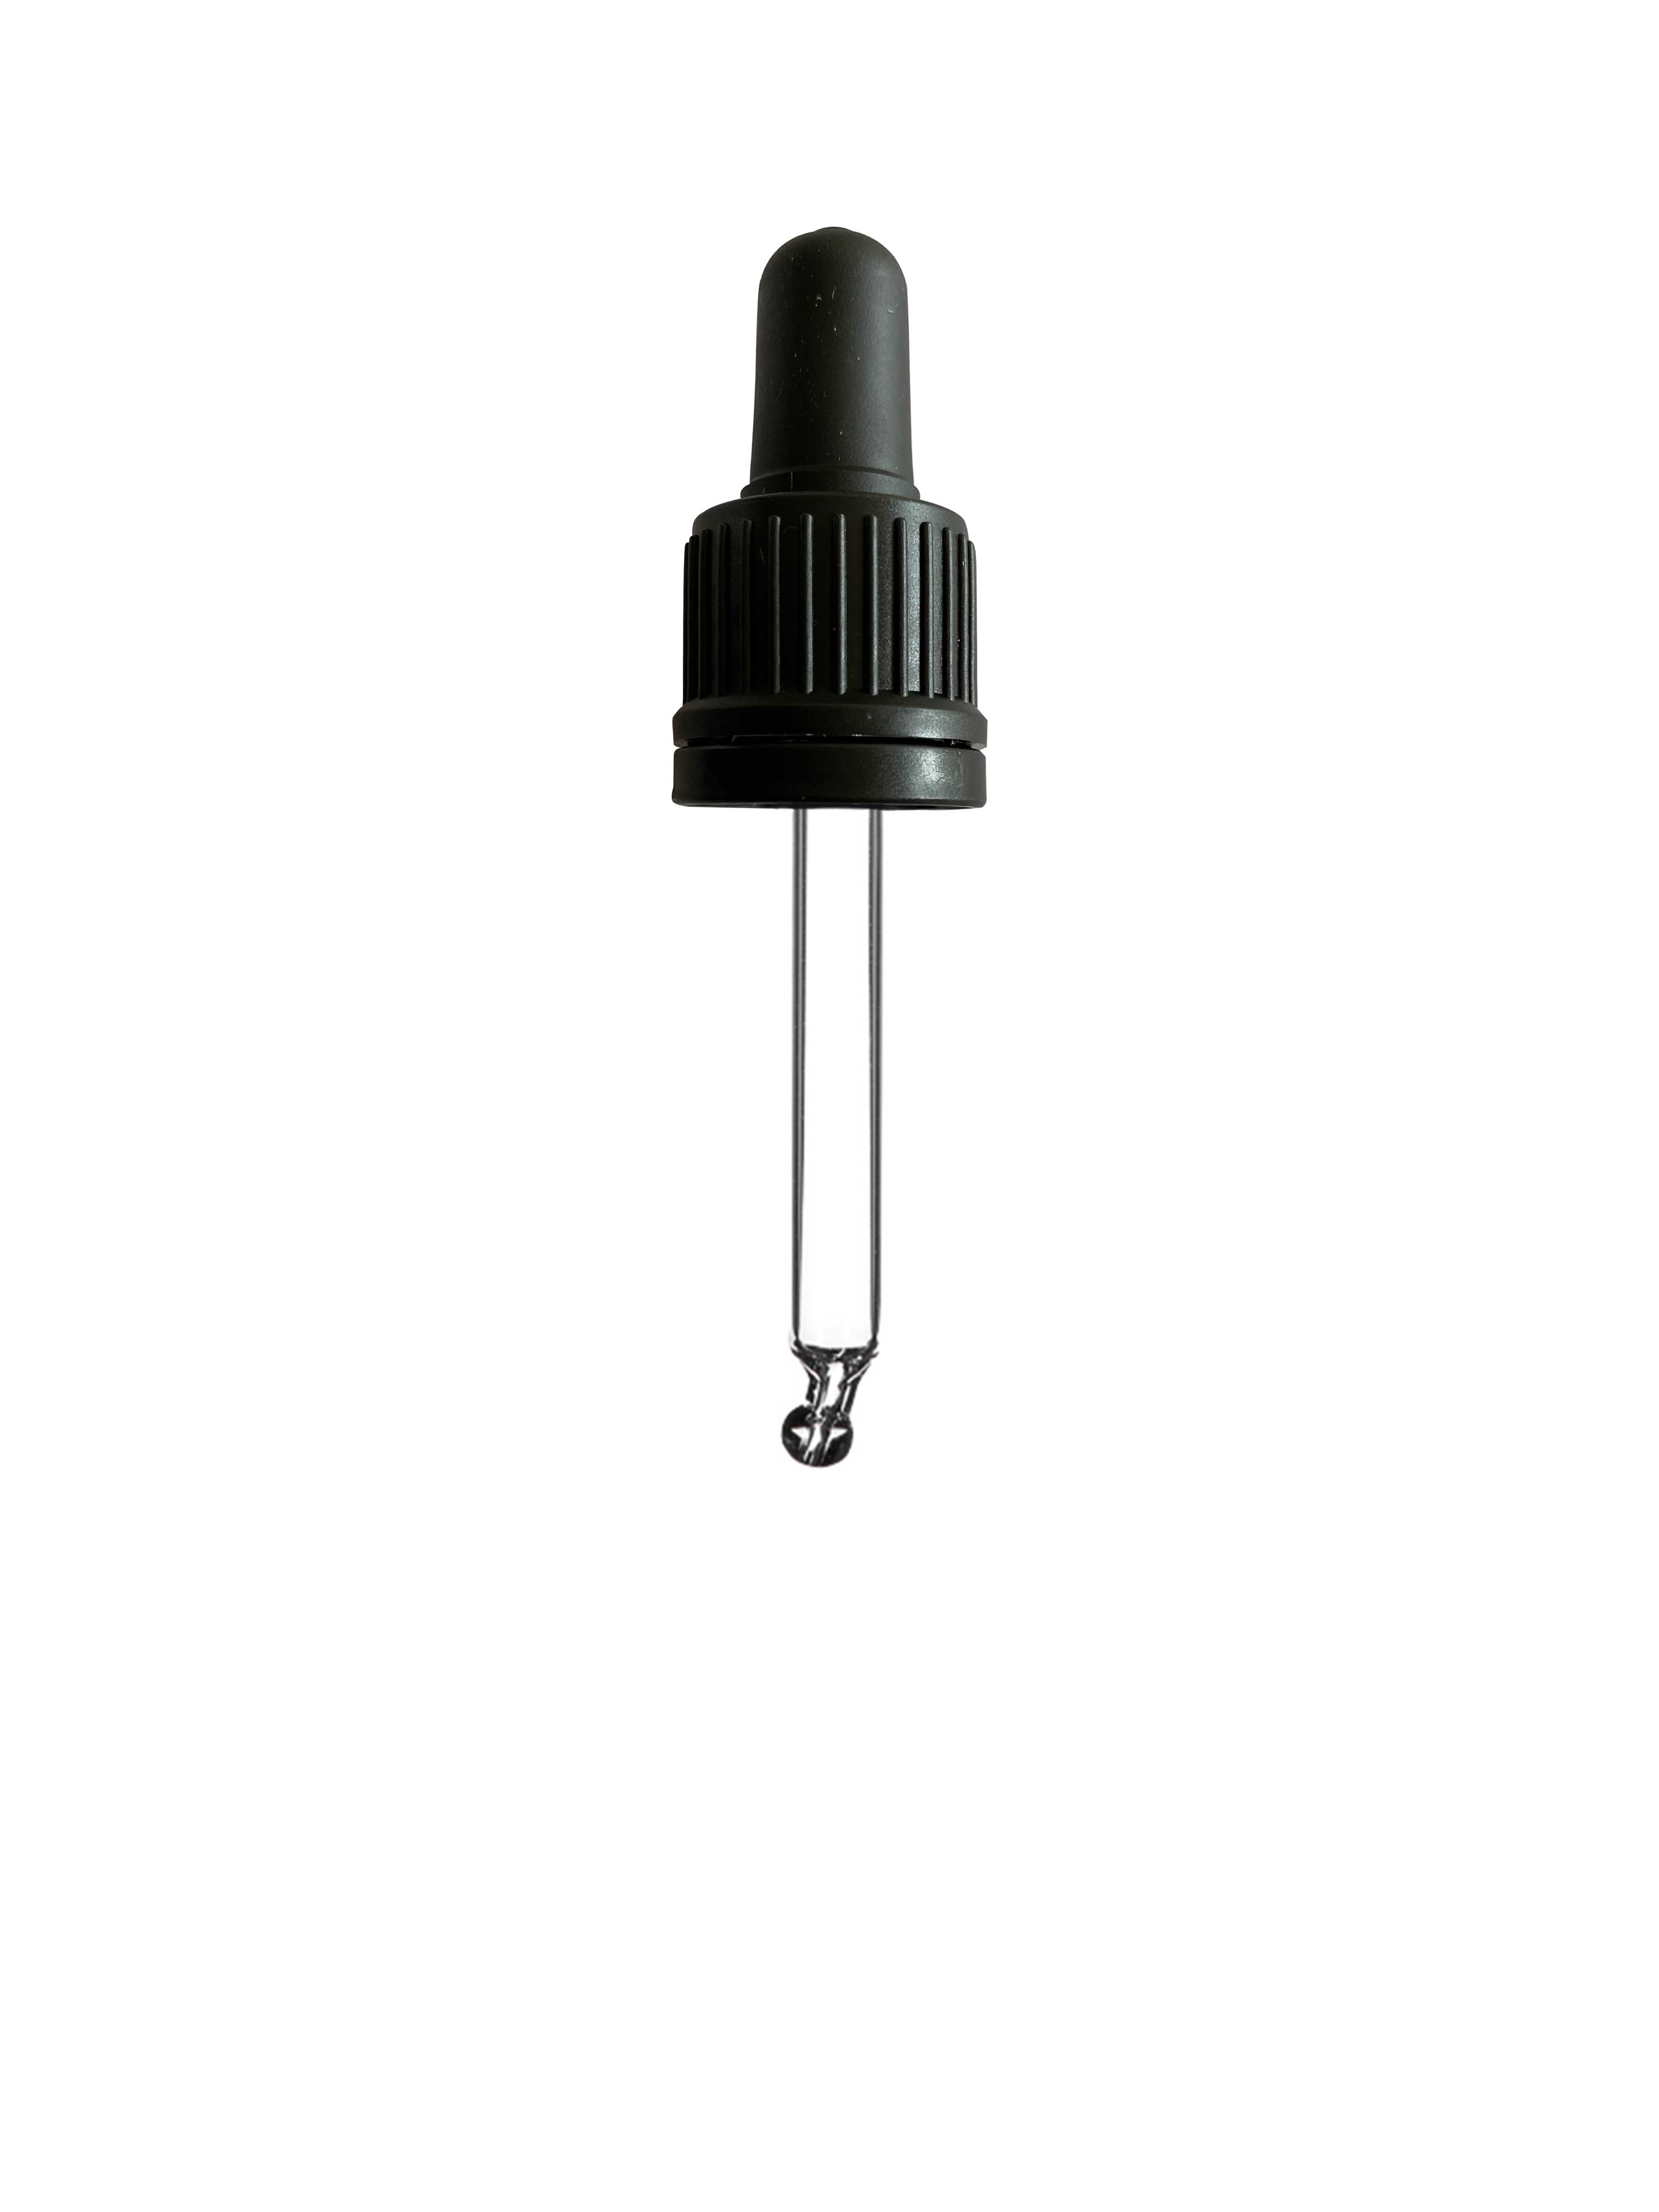 Pipette series II, DIN18, tamper-evident, PP, black, ribbed, black bulb TPE 0.7 ml, bent ball tip with 1.0 opening for Ginger 15 ml